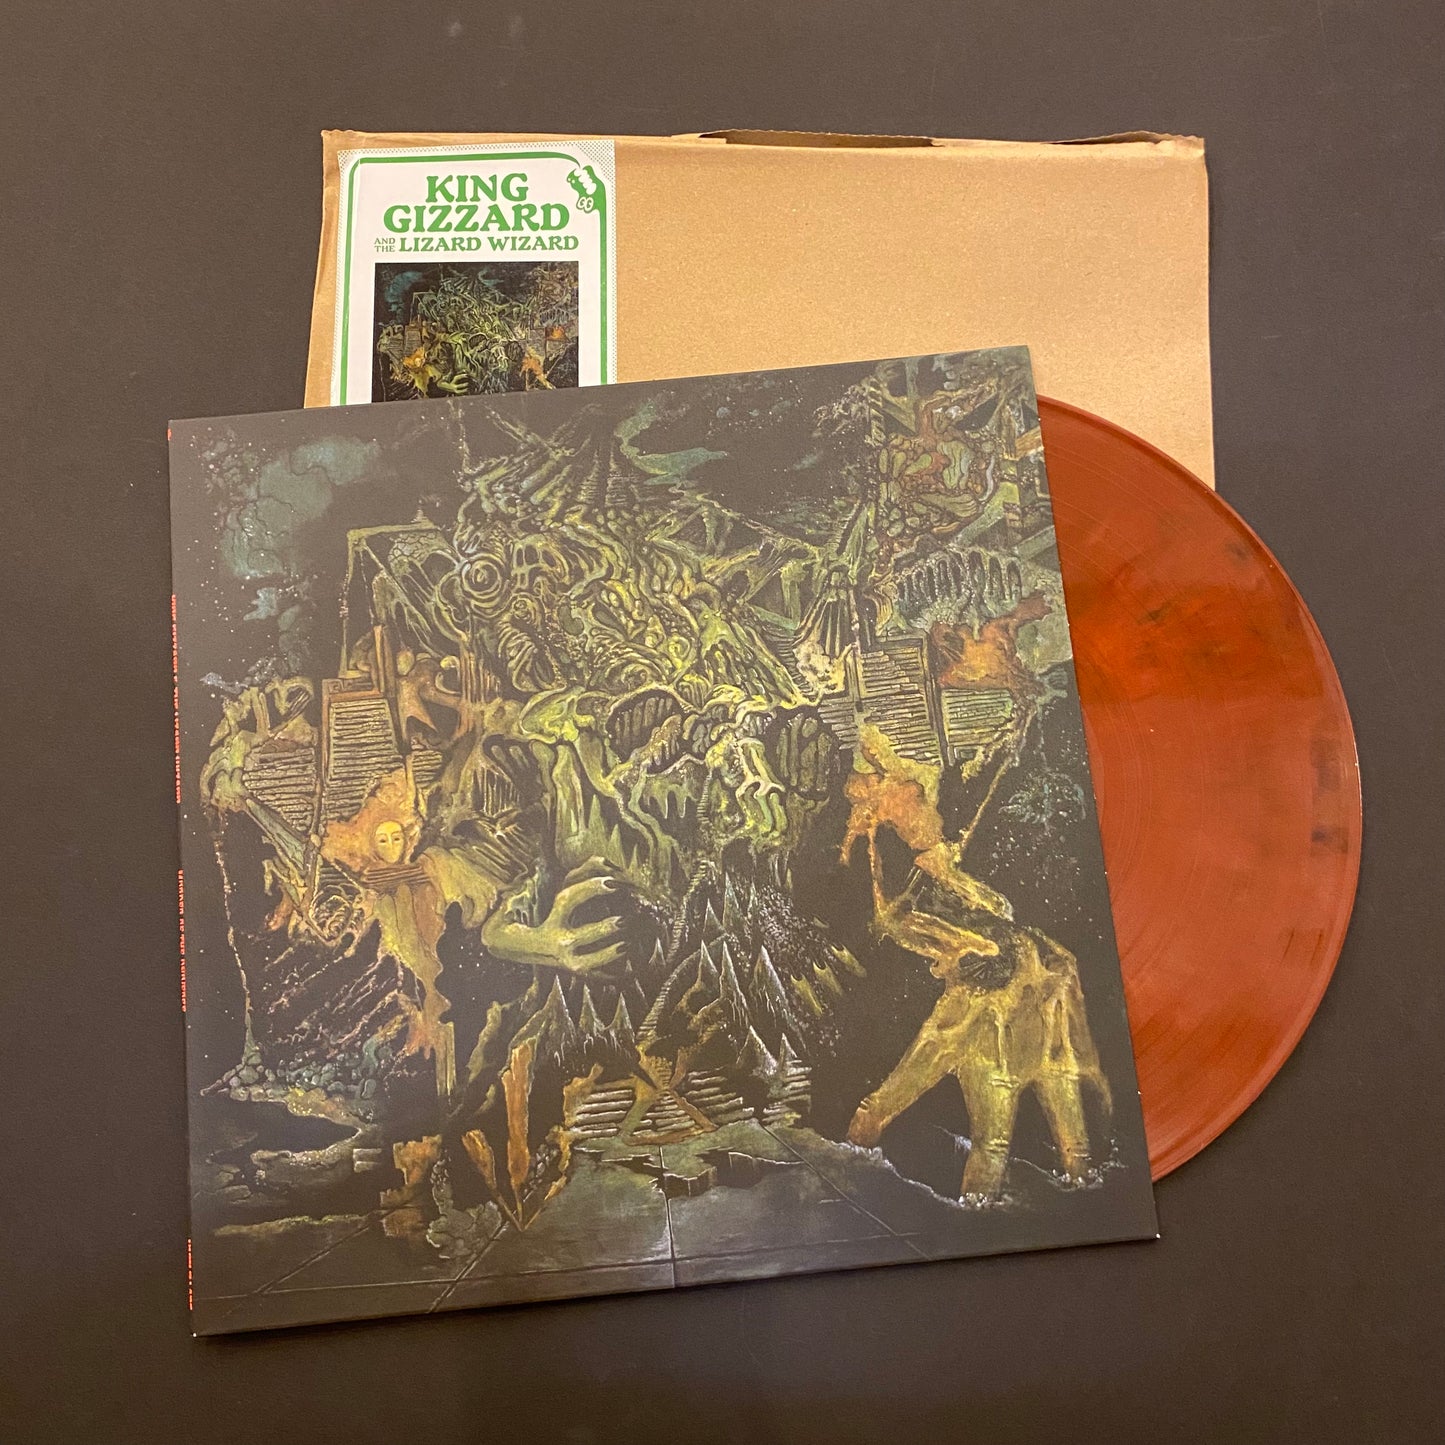 King Gizzard & The Lizard Wizard 'Murder Of The Universe' LP (*USED*)